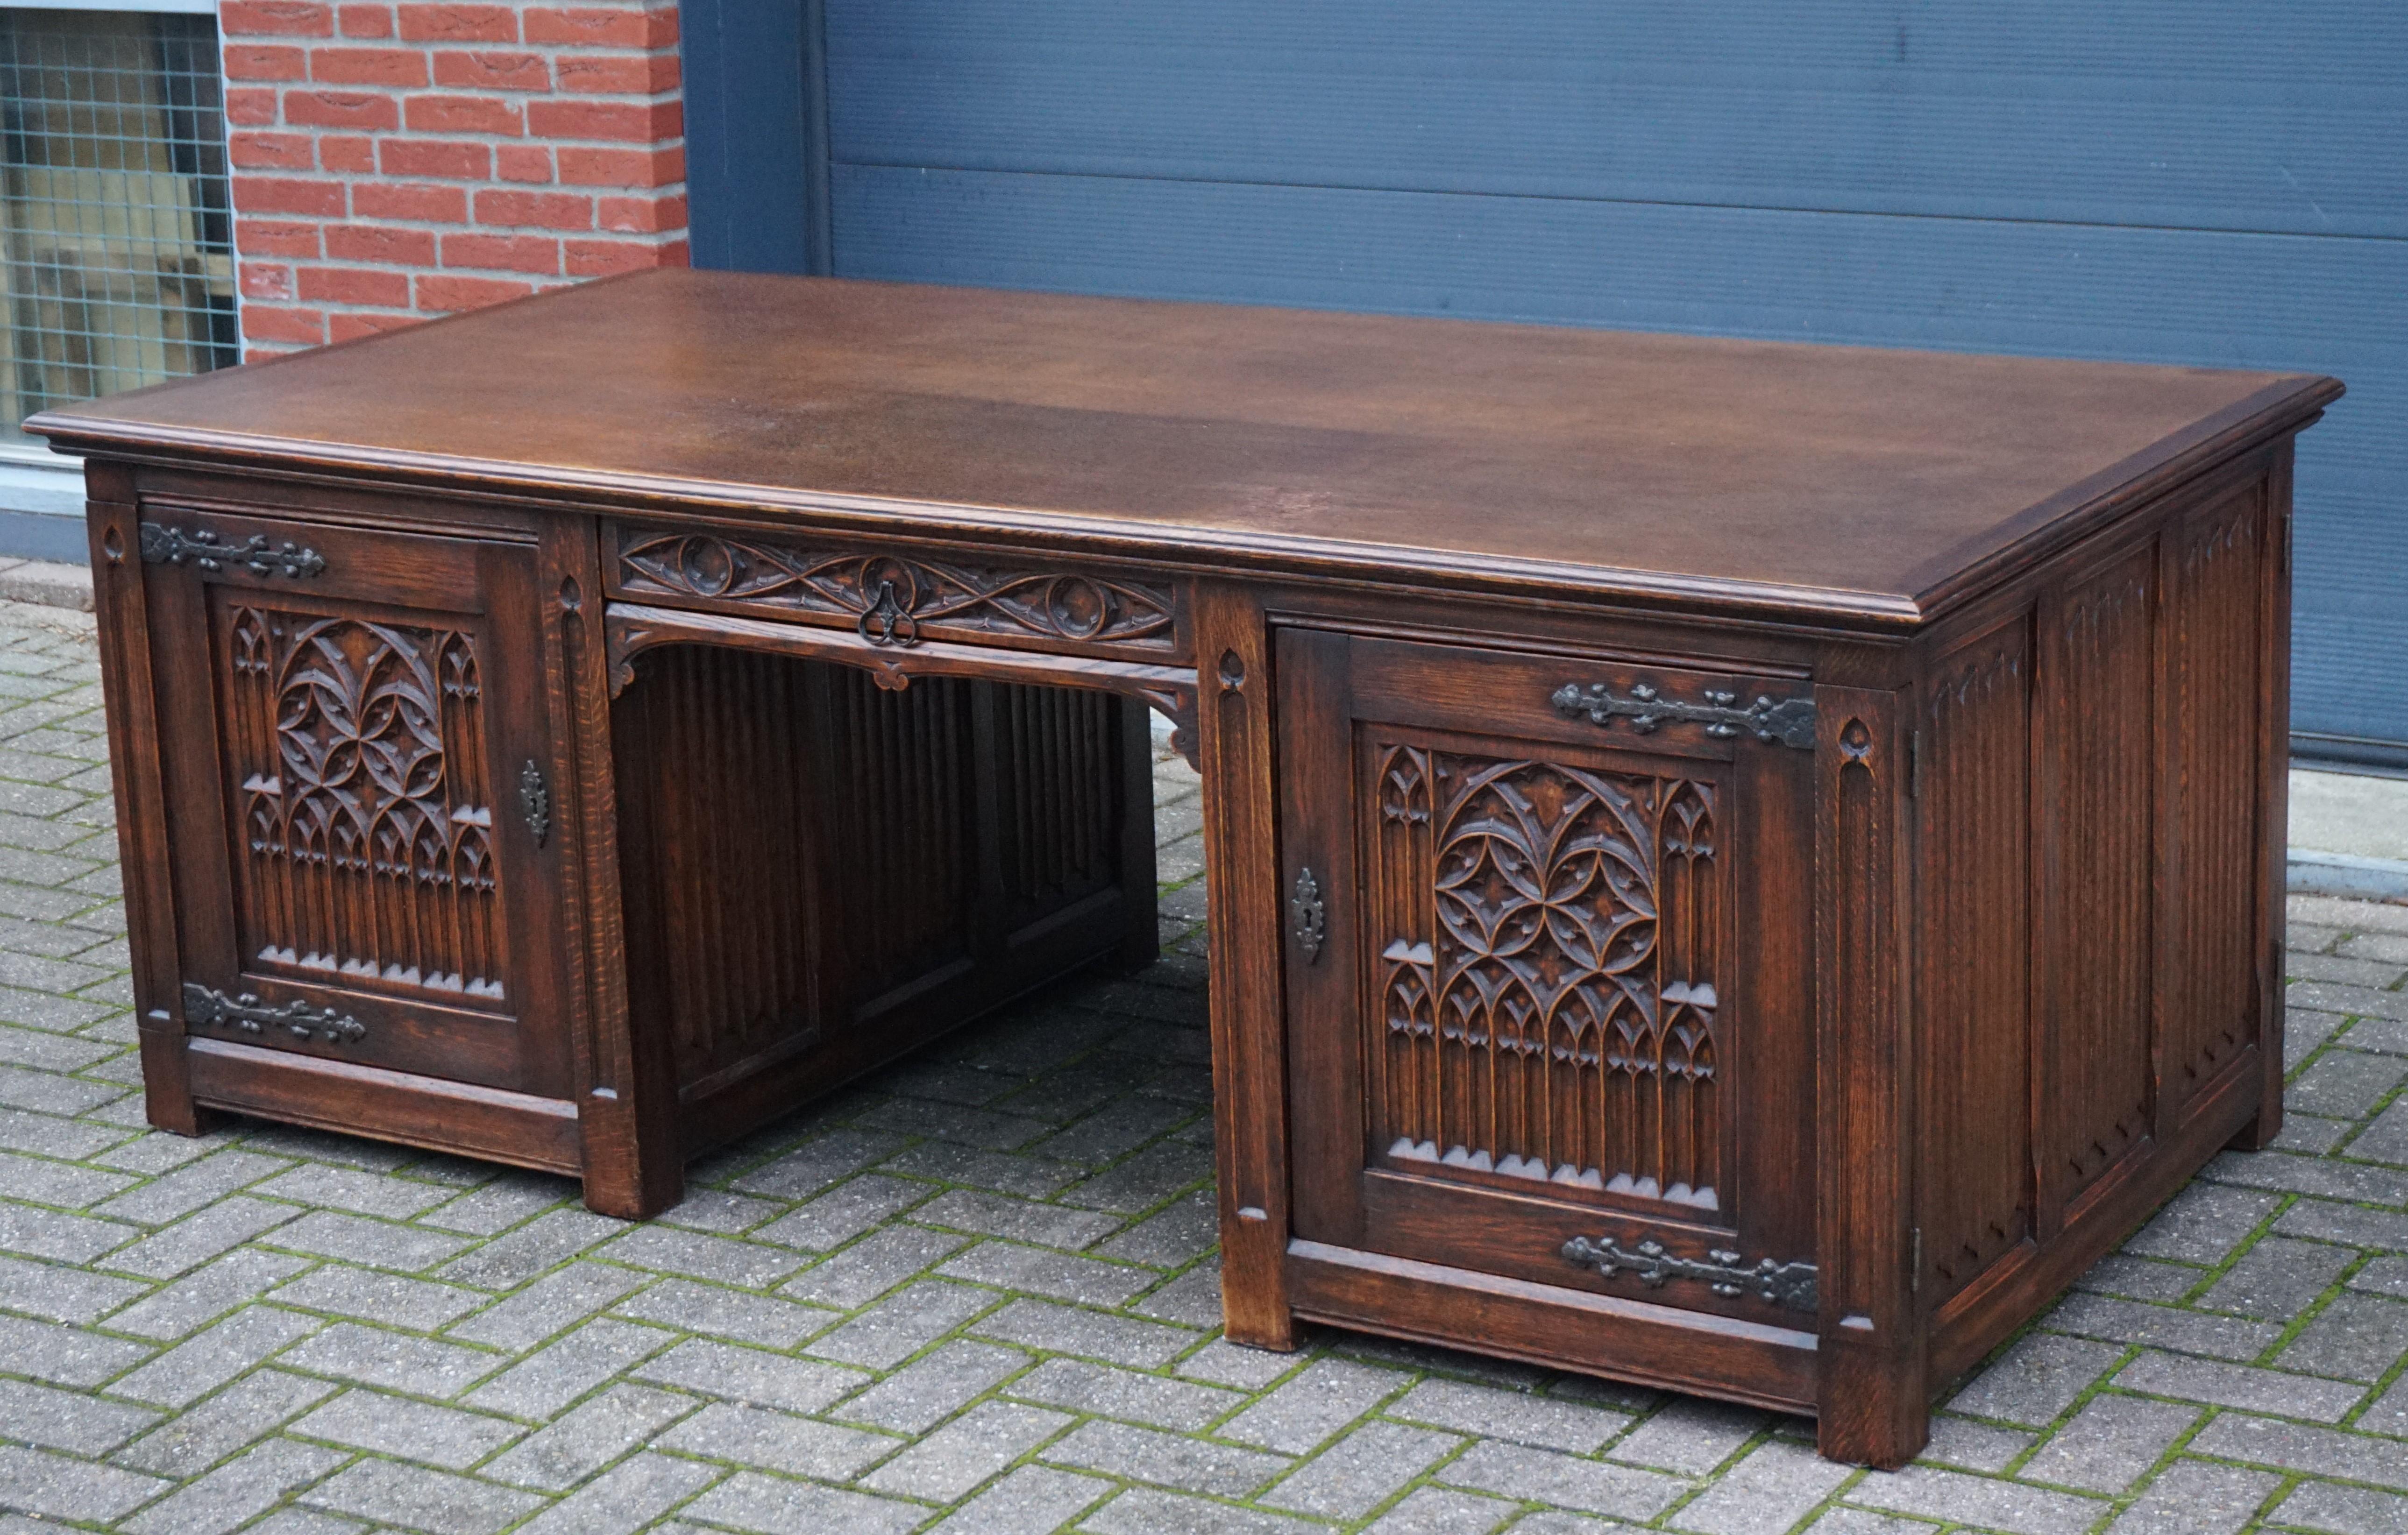 Impressive and beautiful, hand-crafted antique double sided desk.

Everyone knows about first impressions and how much they can mean for a private person, a business or an organisation. Well, imagine yourself entering a room and walking up to